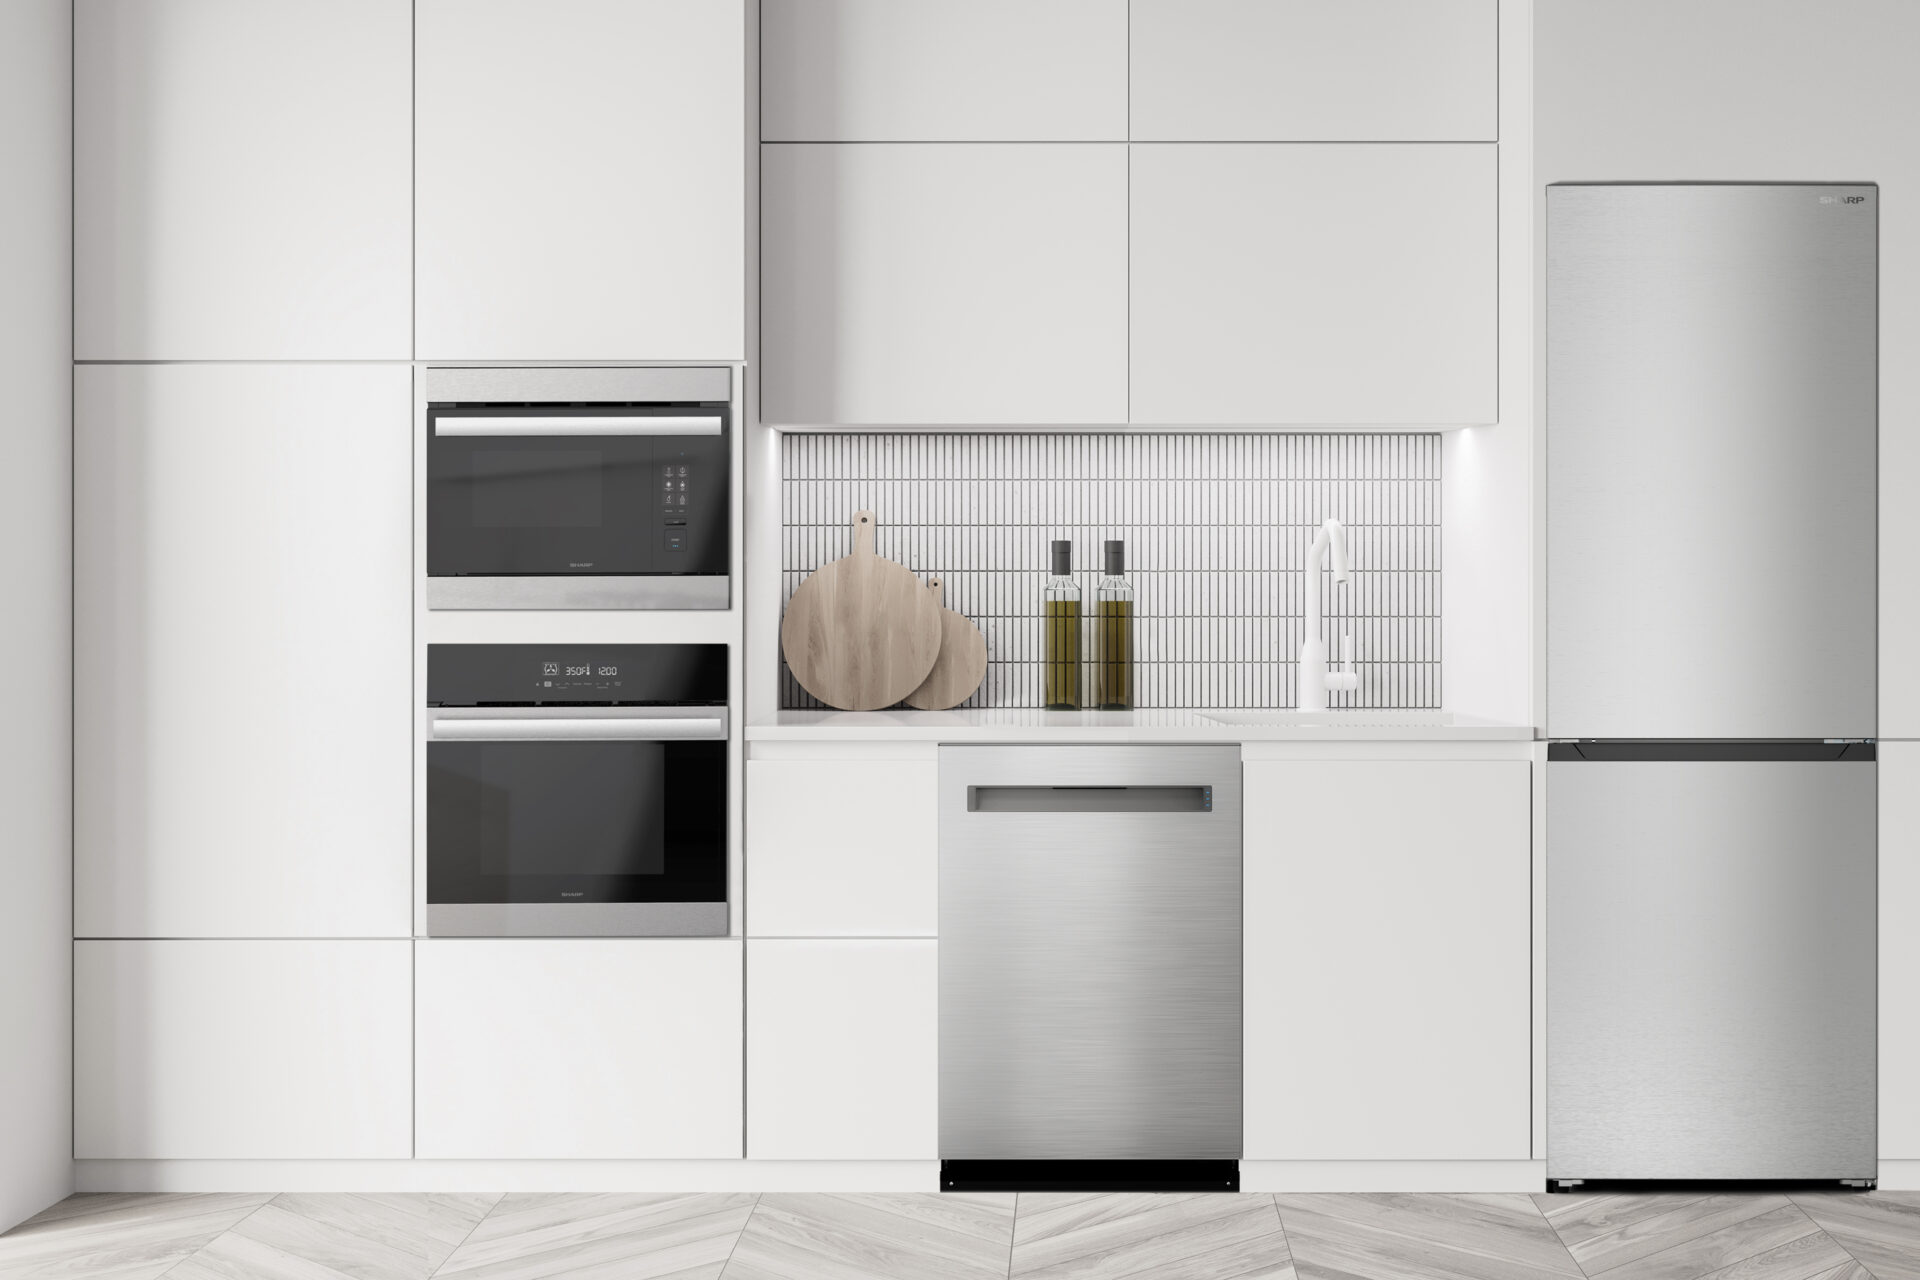 Sleek kitchen appliances for modern cooks to help you level up